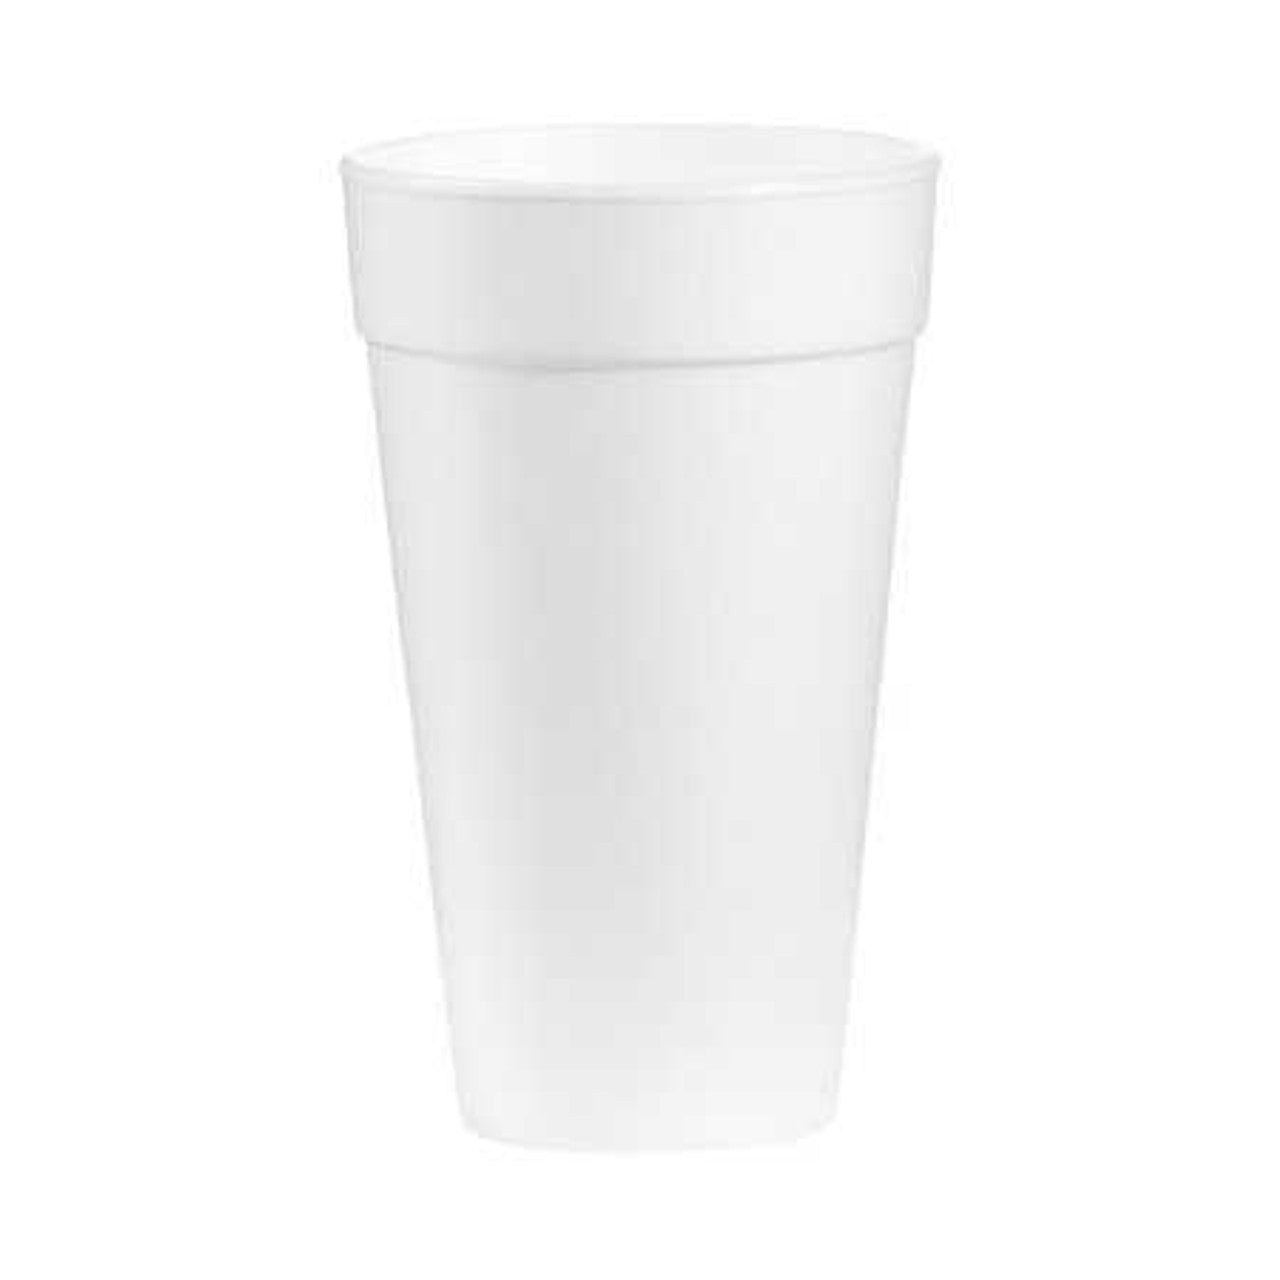 Wincup Drinking Cup 32oz. White Styrofoam Disposable - 300CT